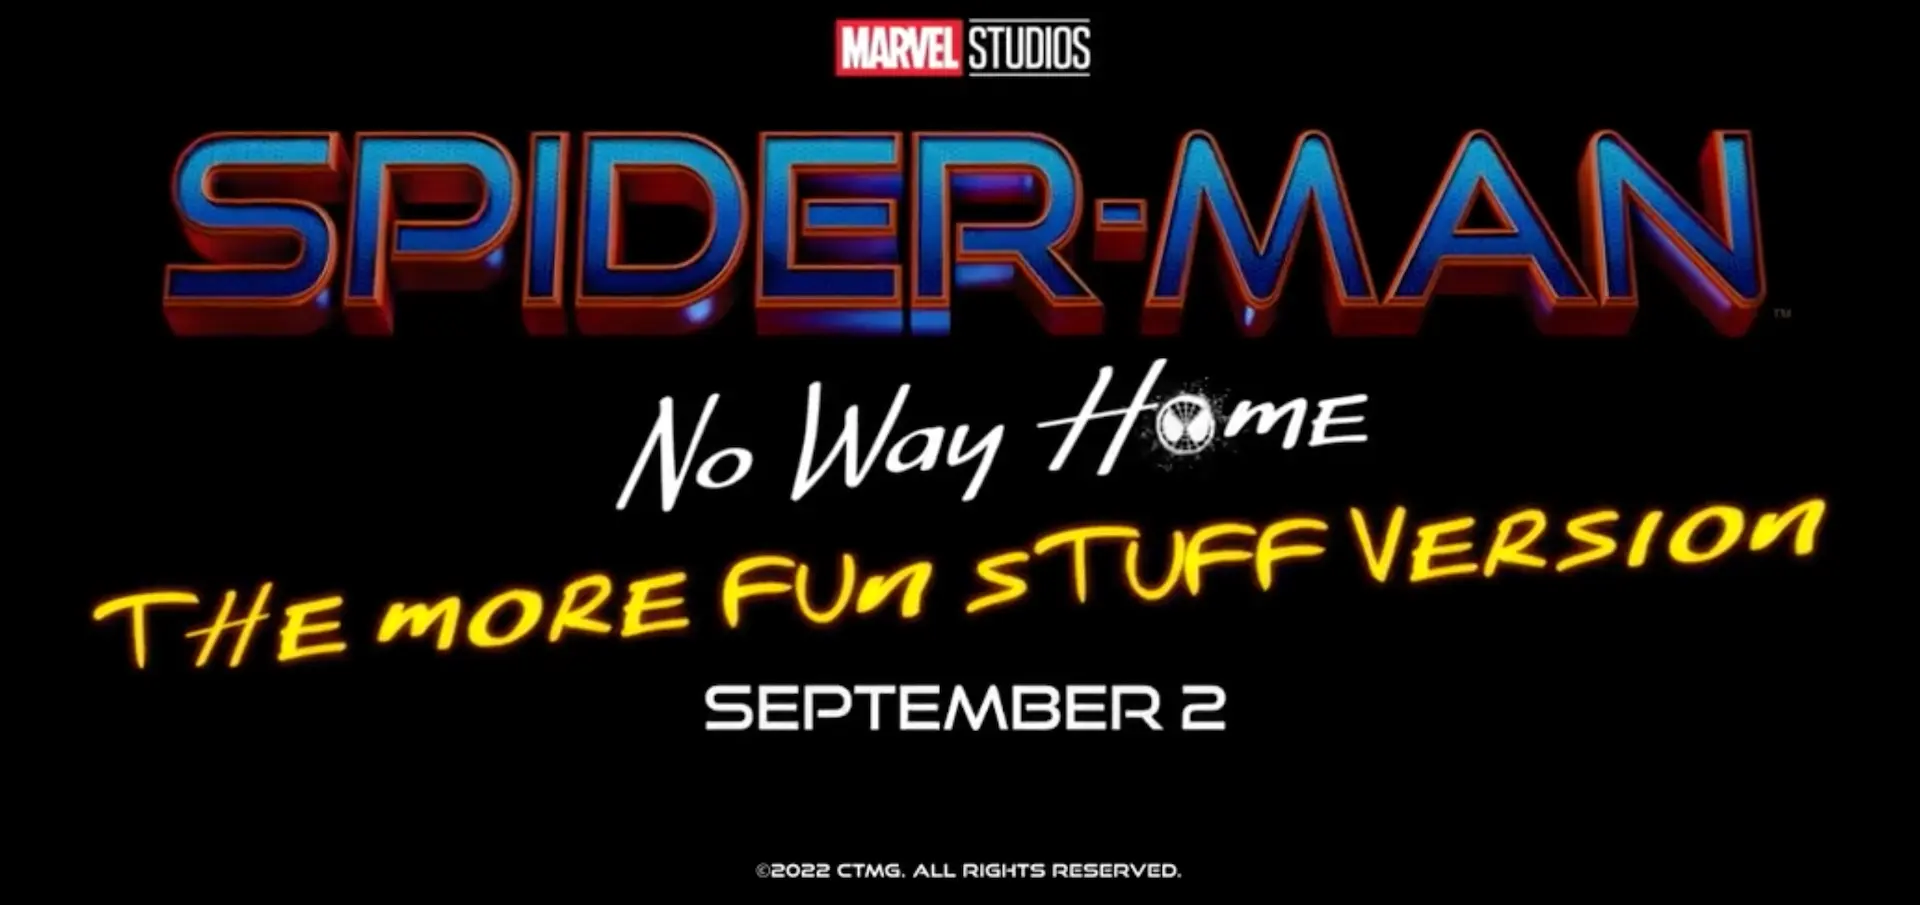 After streaming, Spider-Man 3: No Way Home returns to theaters 